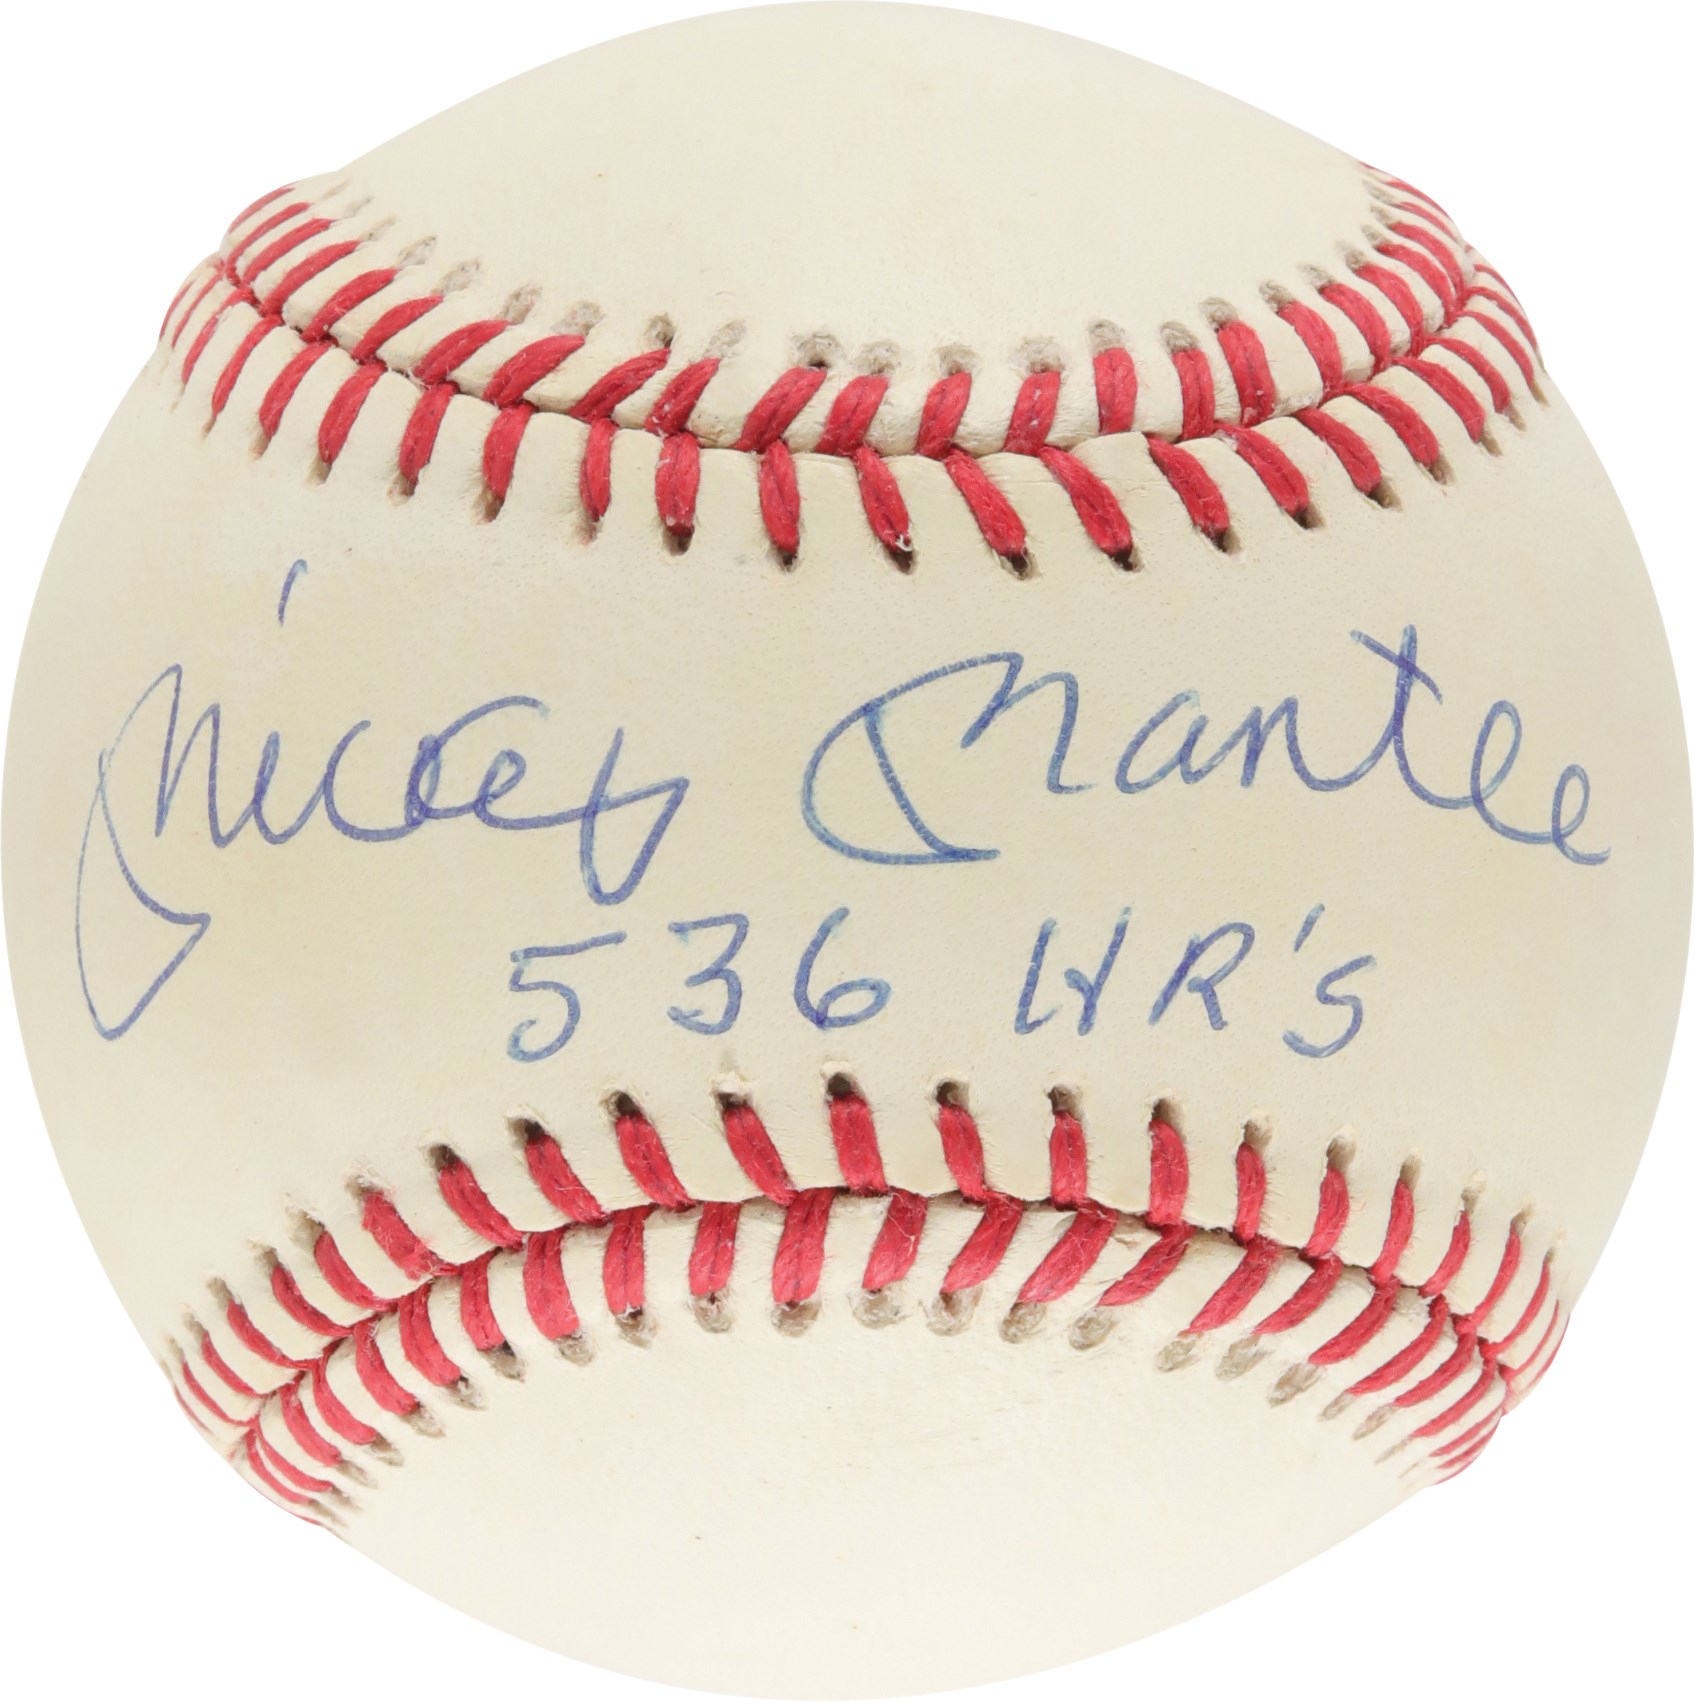 Mantle and Maris - Mickey Mantle "536 HR's" Single-Signed Baseball (PSA)